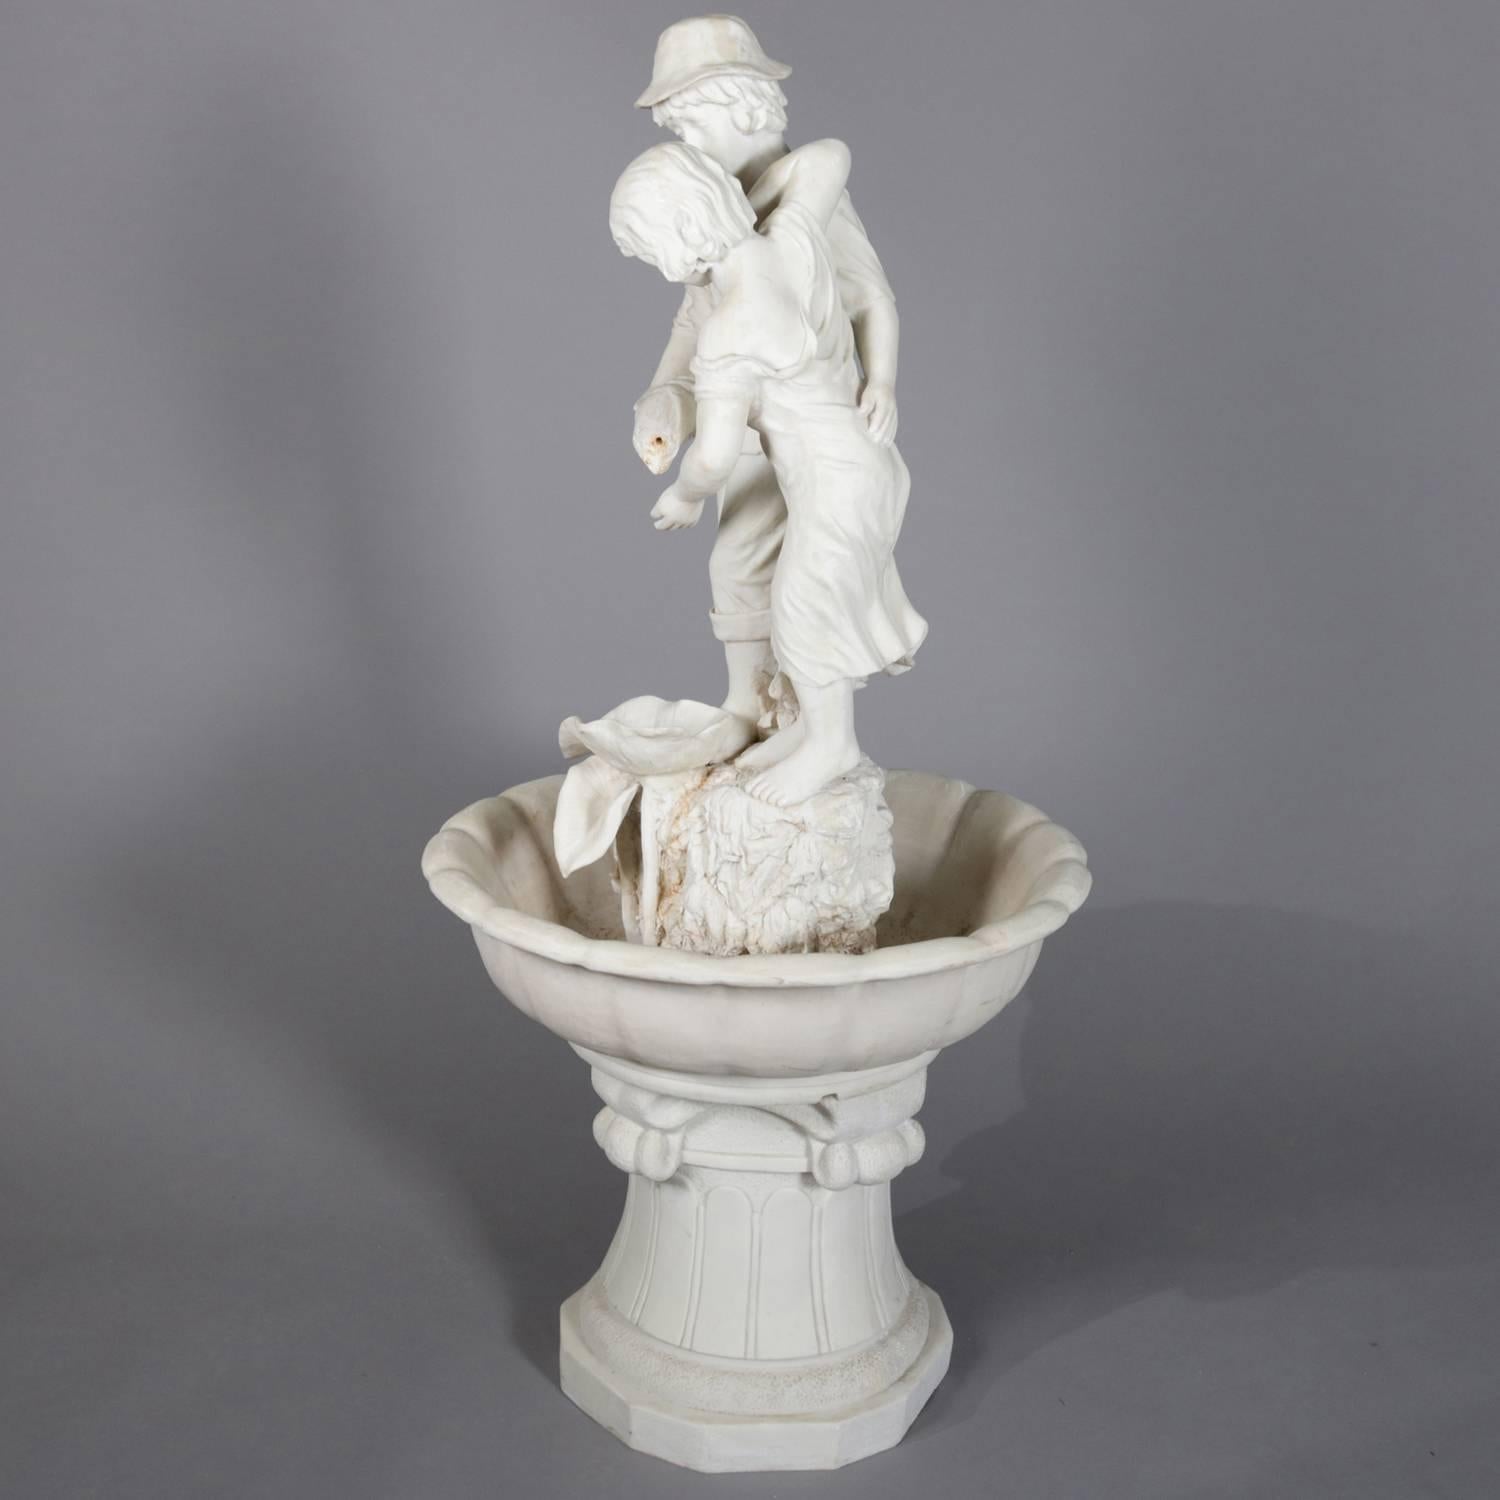 Molded Figural French Garden Fountain with Seaside Courting Couple Sculpture